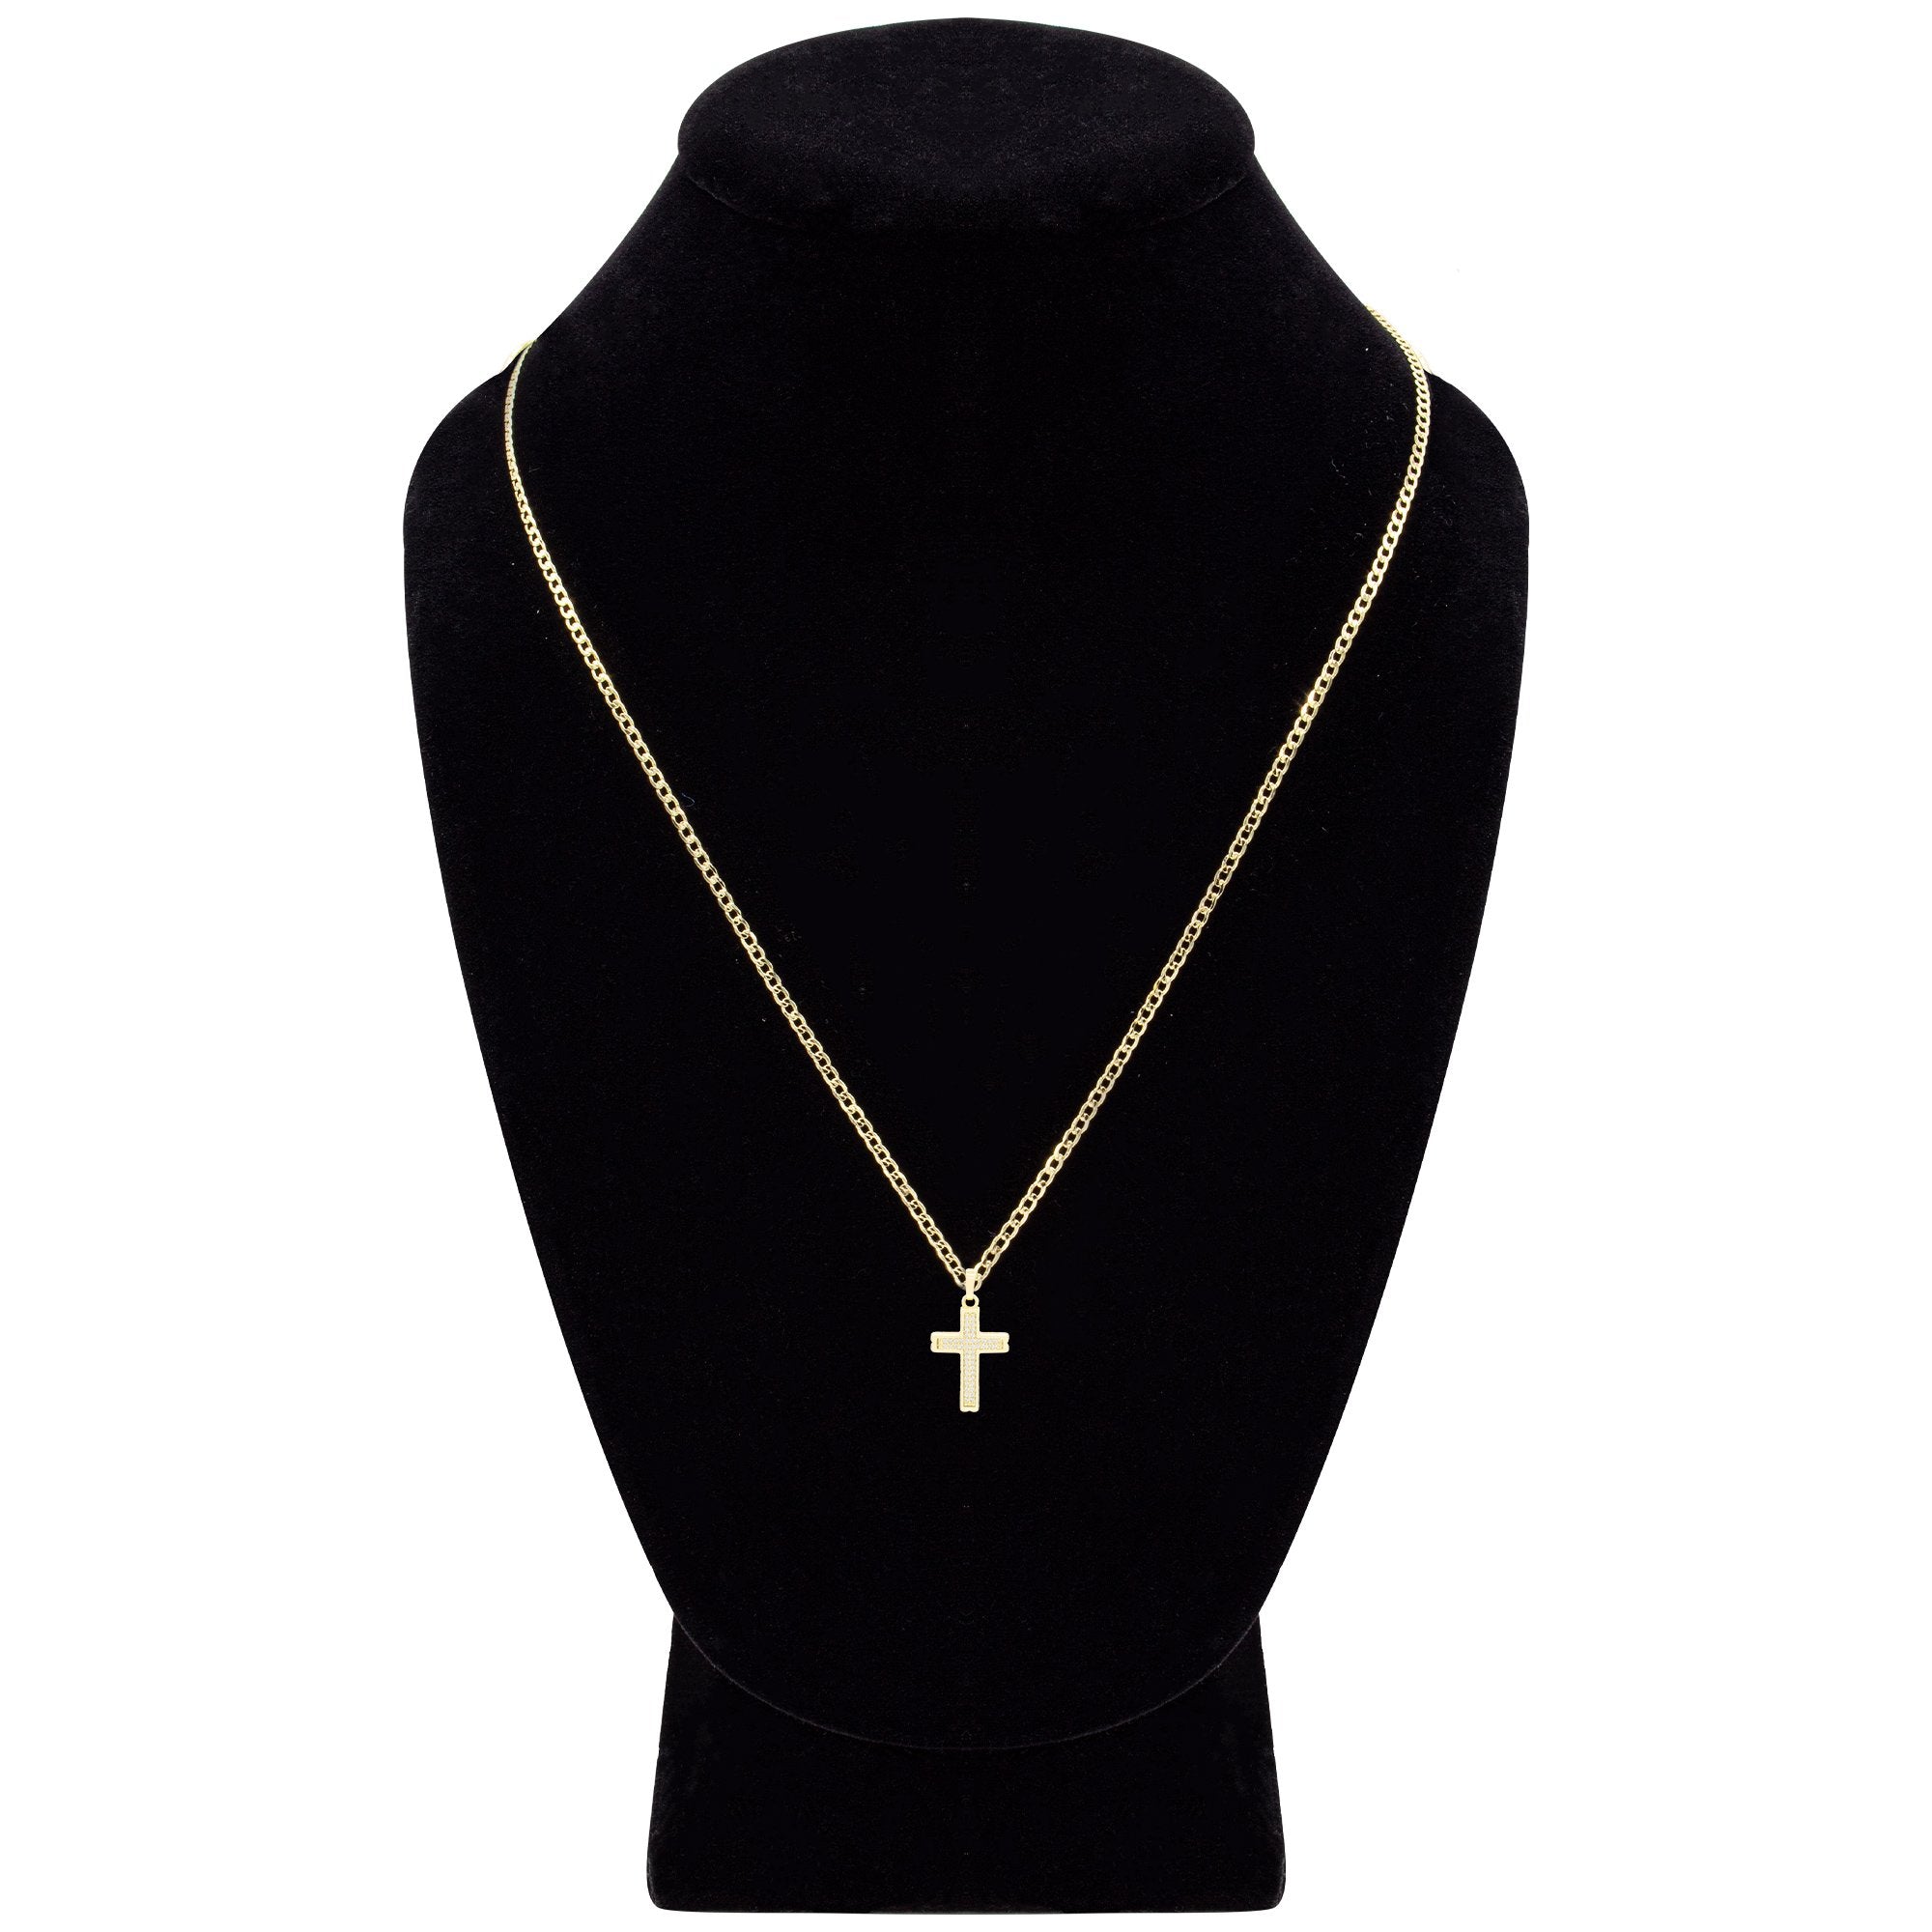 CZ Stone Bordered Cross Cubic Zirconia Pendant With Necklace Set 14K Gold Filled